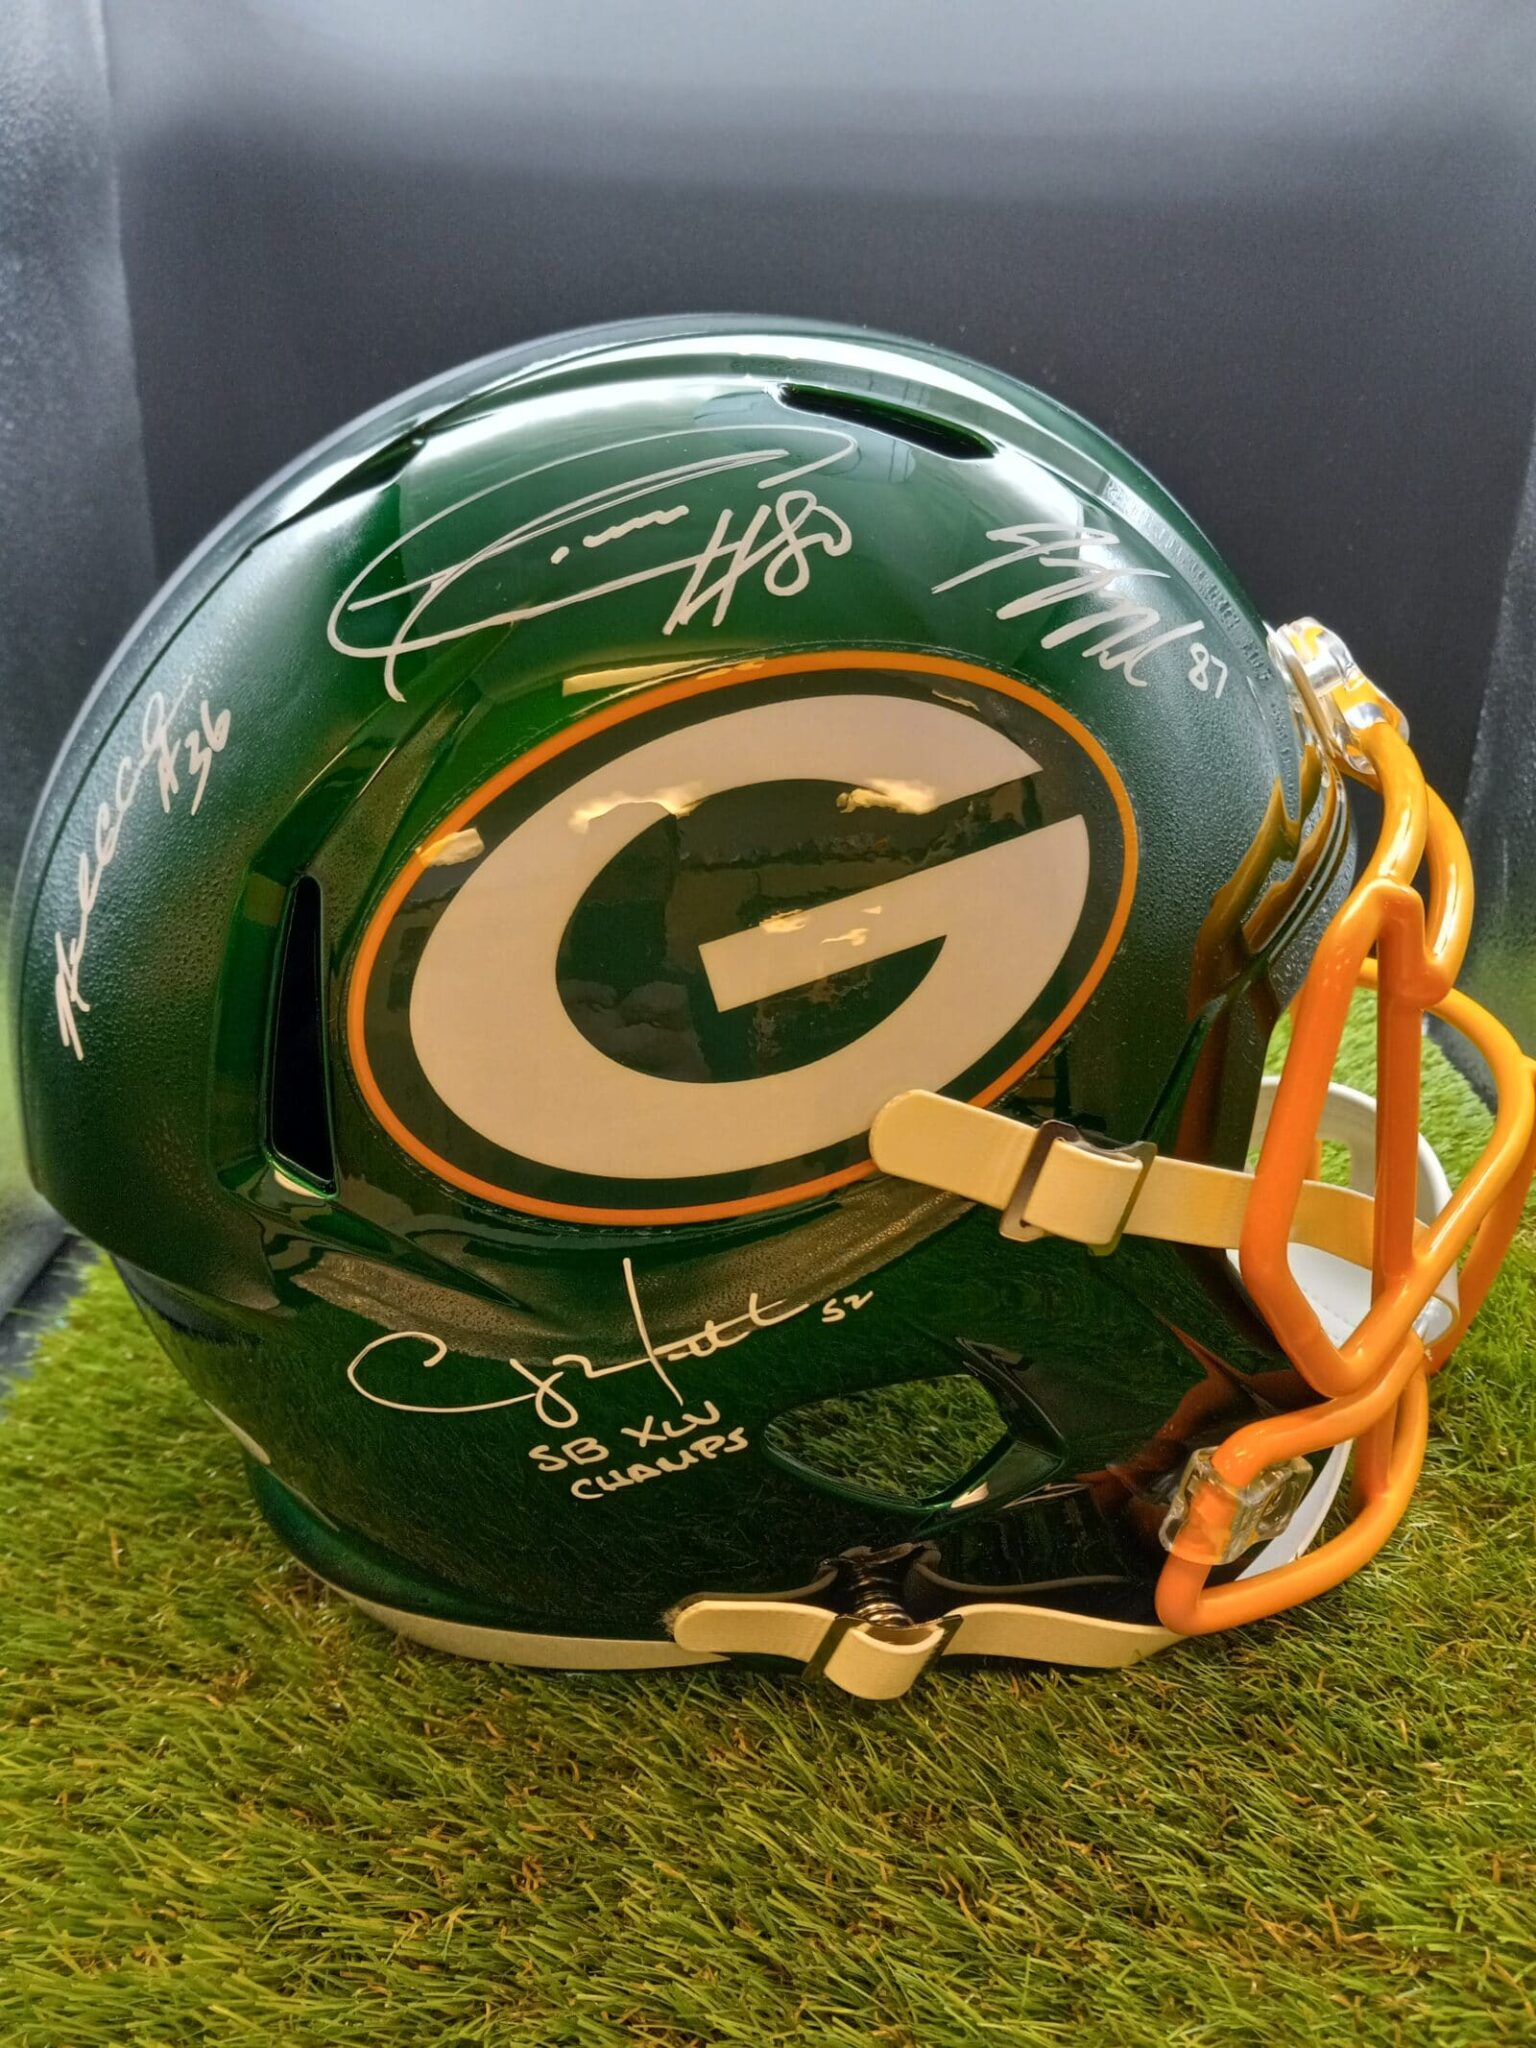 packers Signed Sports Memorabilia, real Signed Sports Memorabilia, Wisconsin Signed Sports Memorabilia